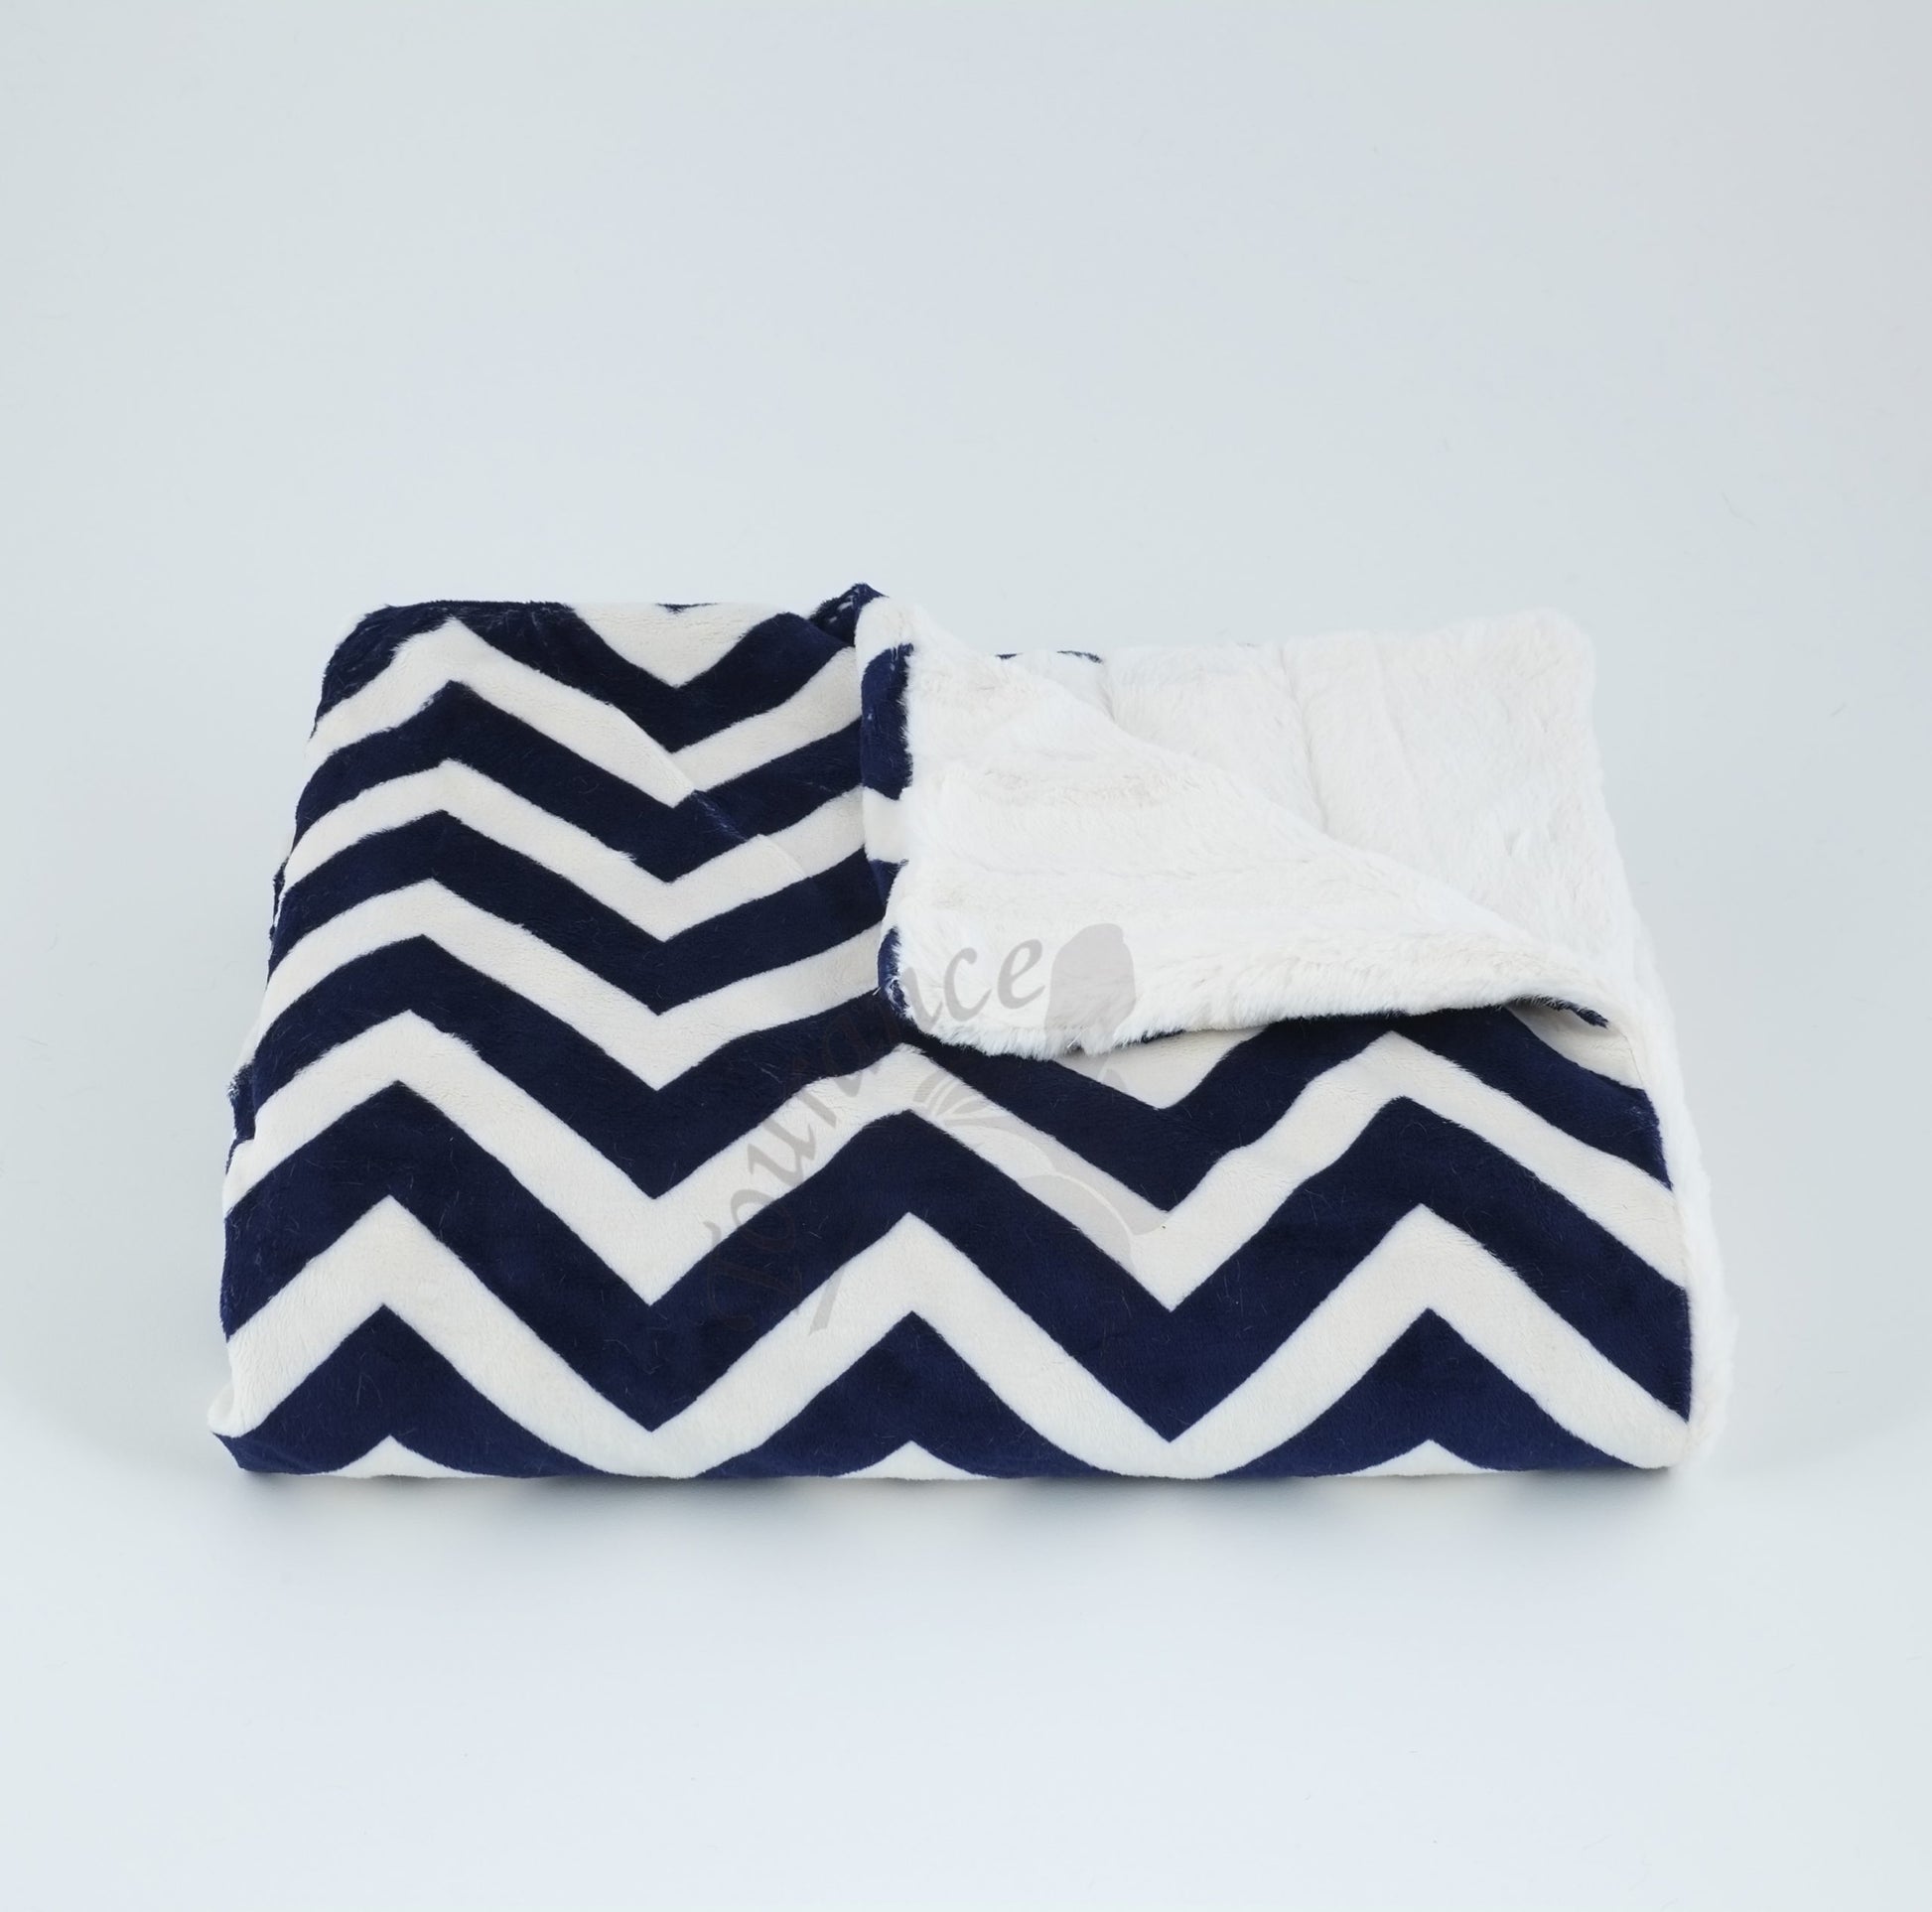 Chevron Baby Blanket In Navy & Ivory with Tourance watermark